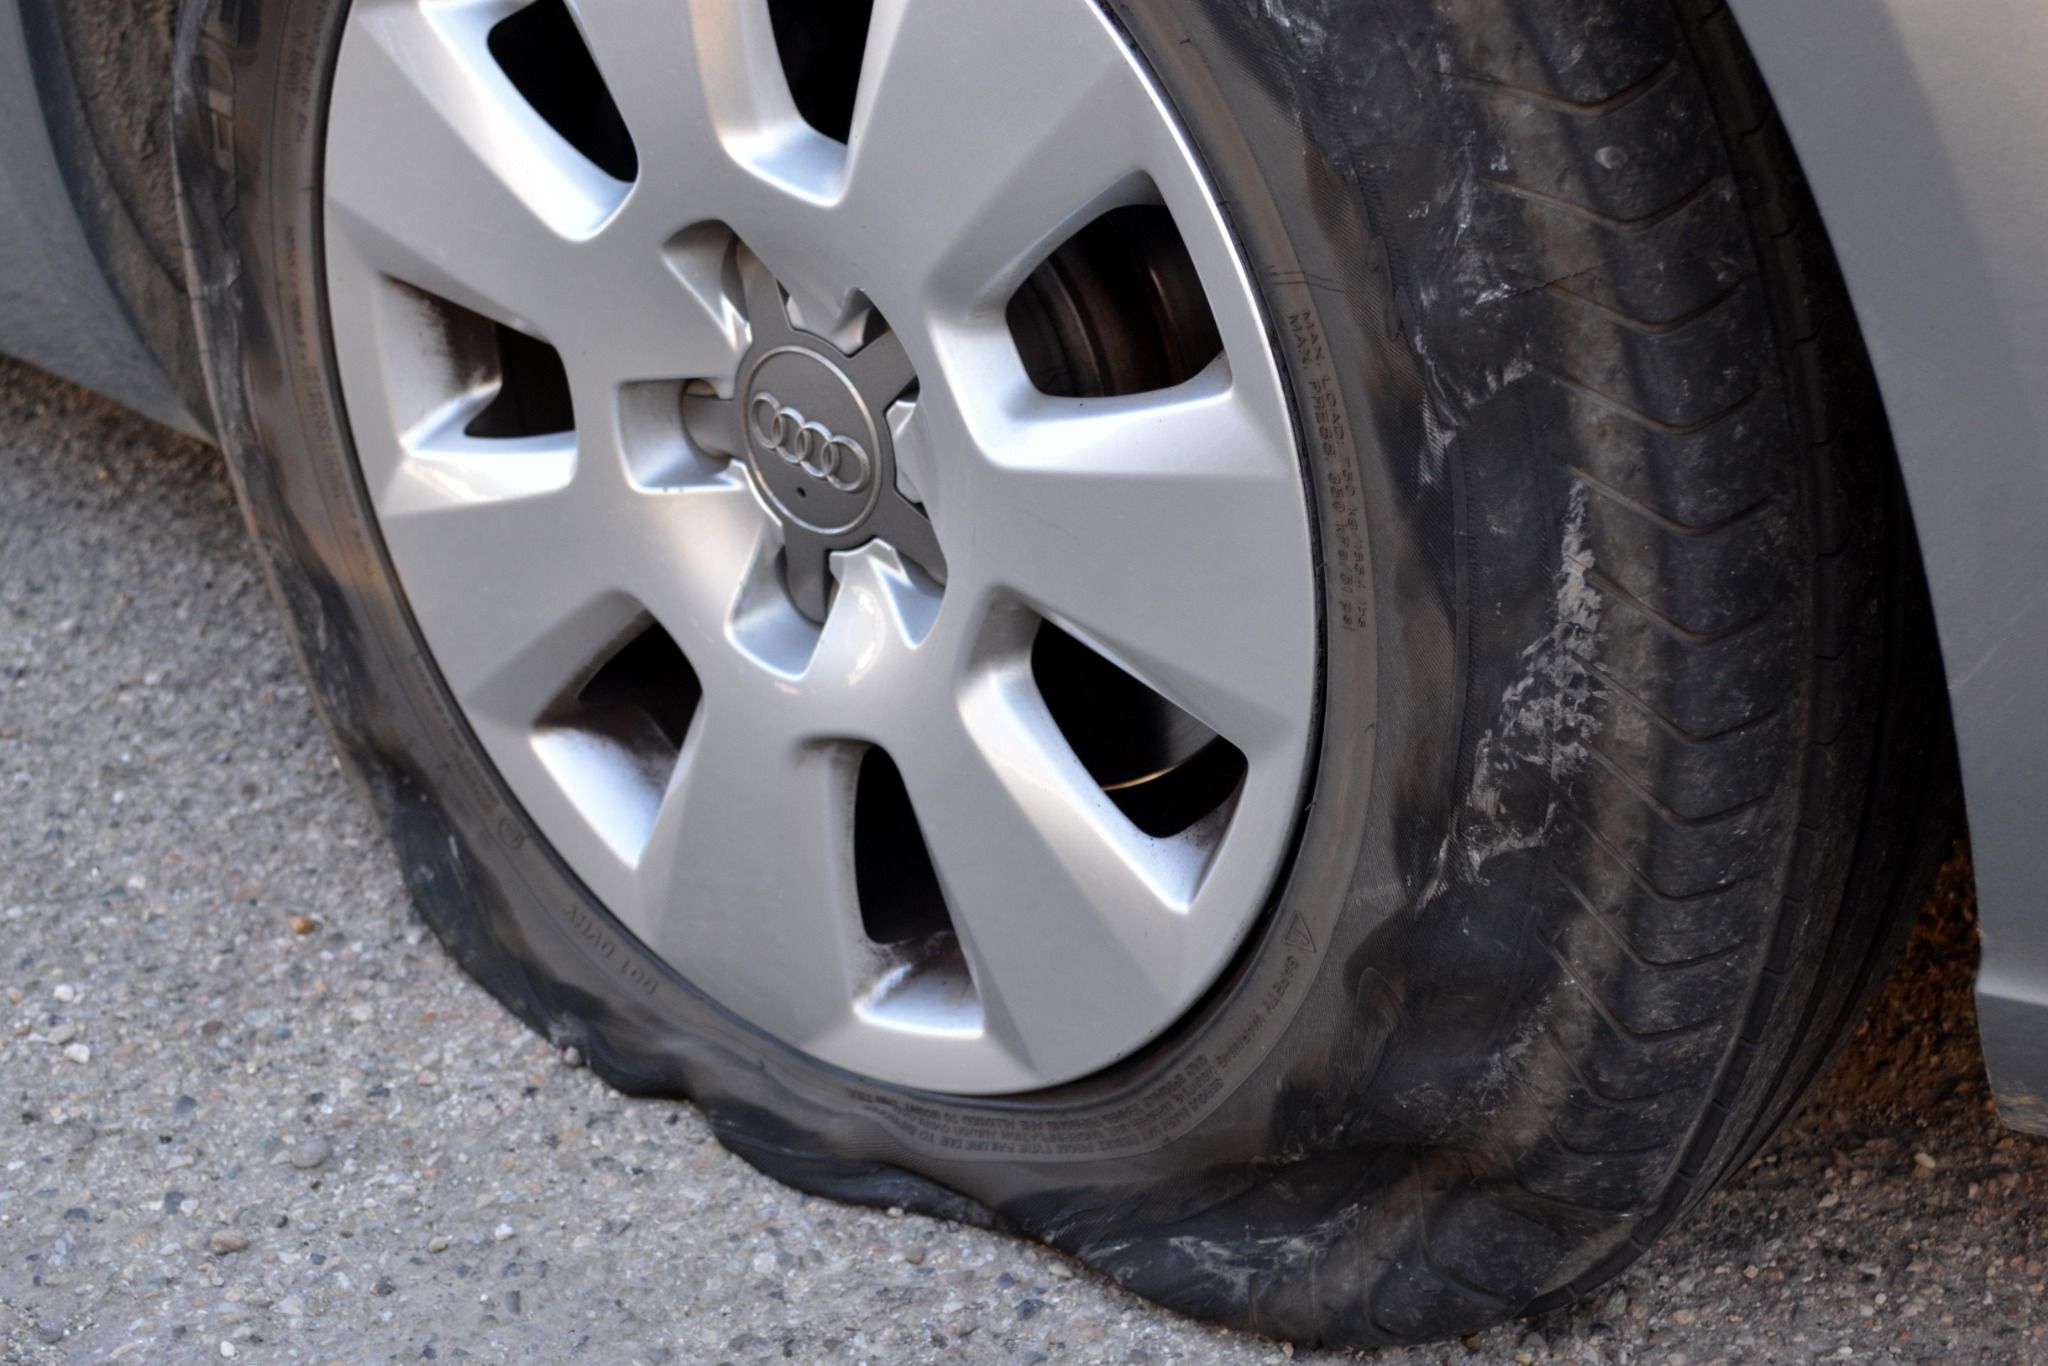 Close up of a flat tyre on a car